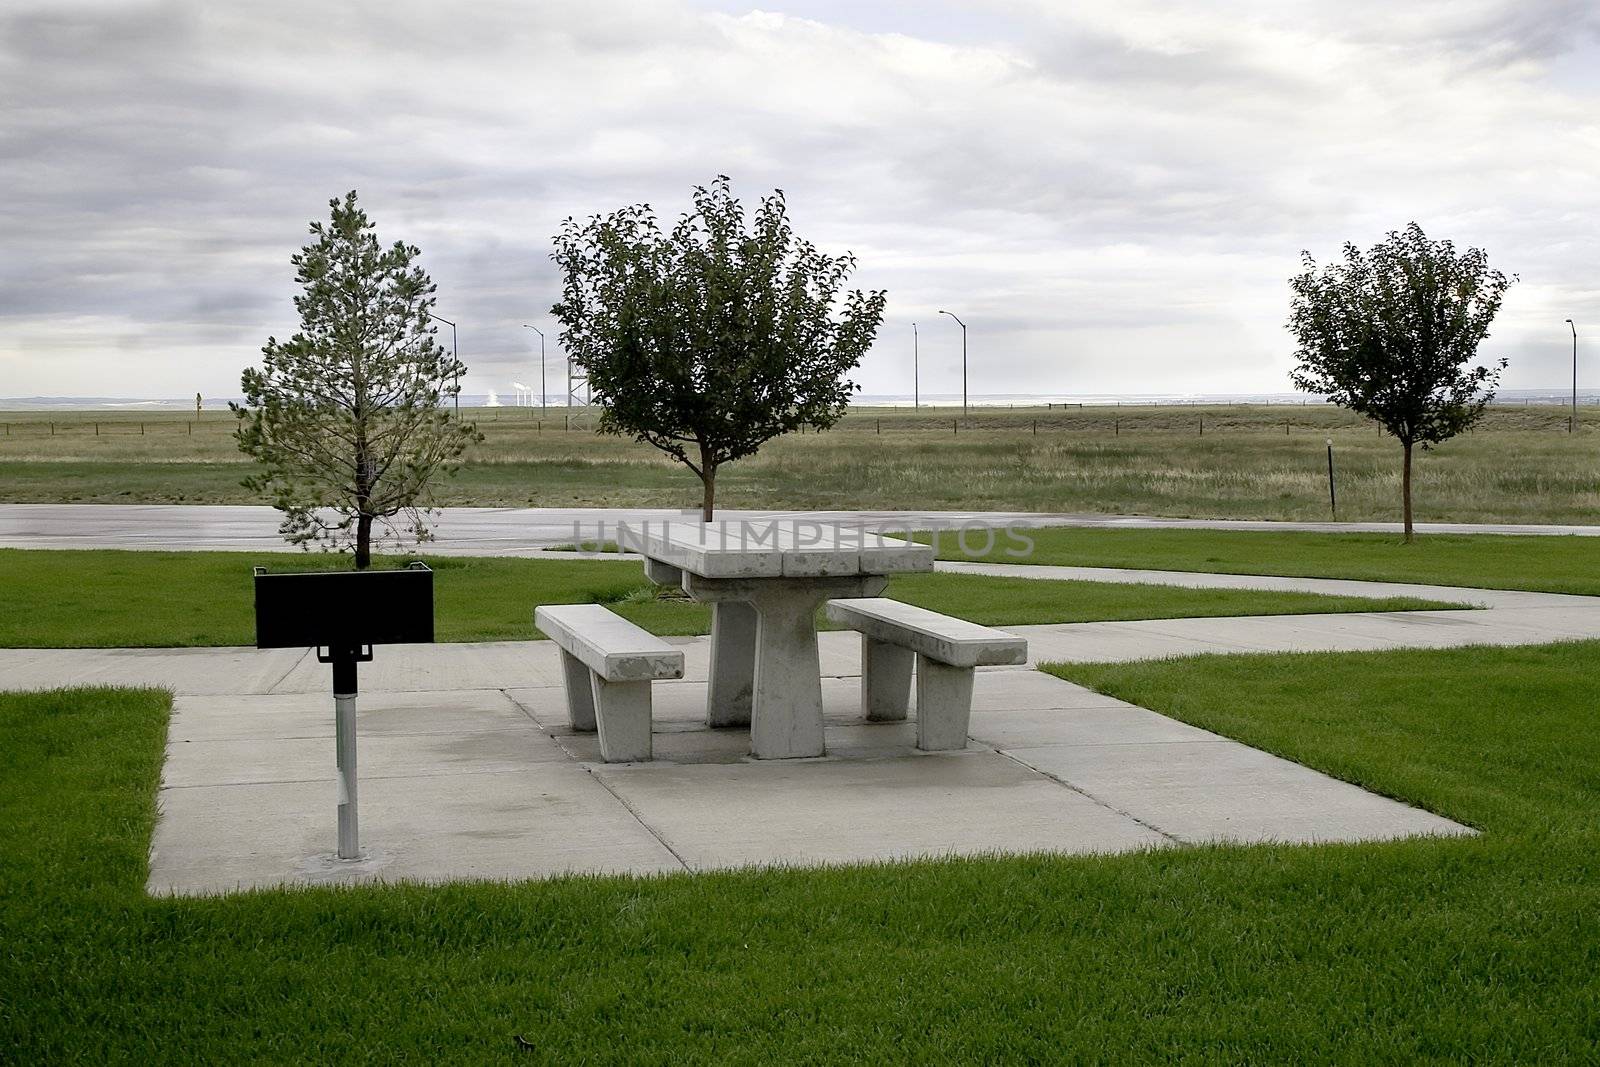 A modern concrete picnic spot at a Wyoming interstate rest area with a power plant in the background.